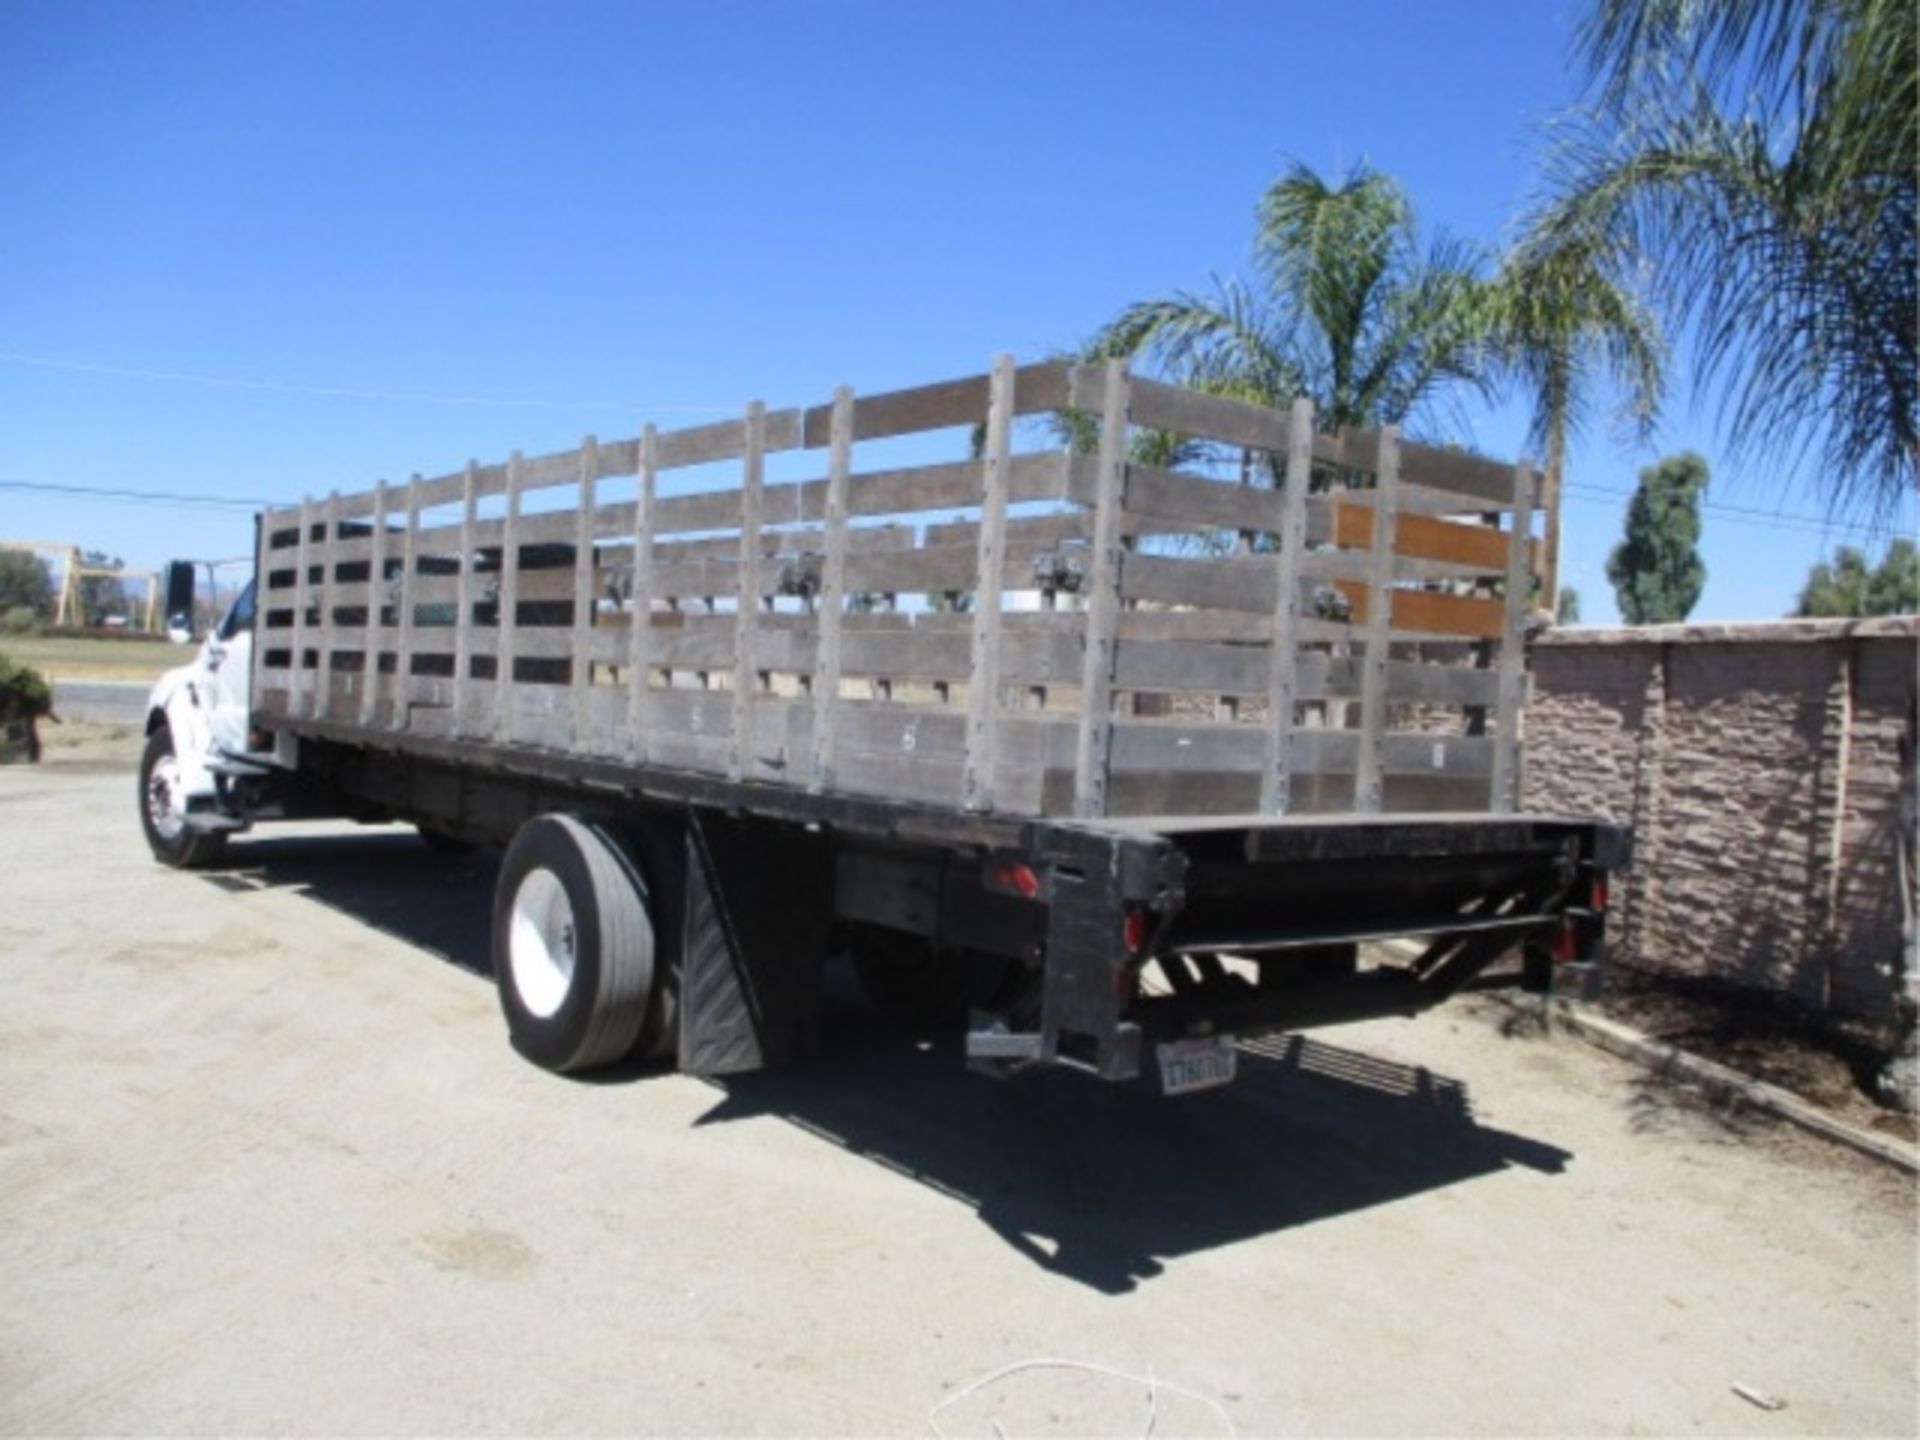 2005 Ford F650 S/A Flatbed Stakebed Truck, Cat C7 Acert 7.2L 6-Cyl Diesel, Automatic, Lift Gate, 24' - Image 19 of 61